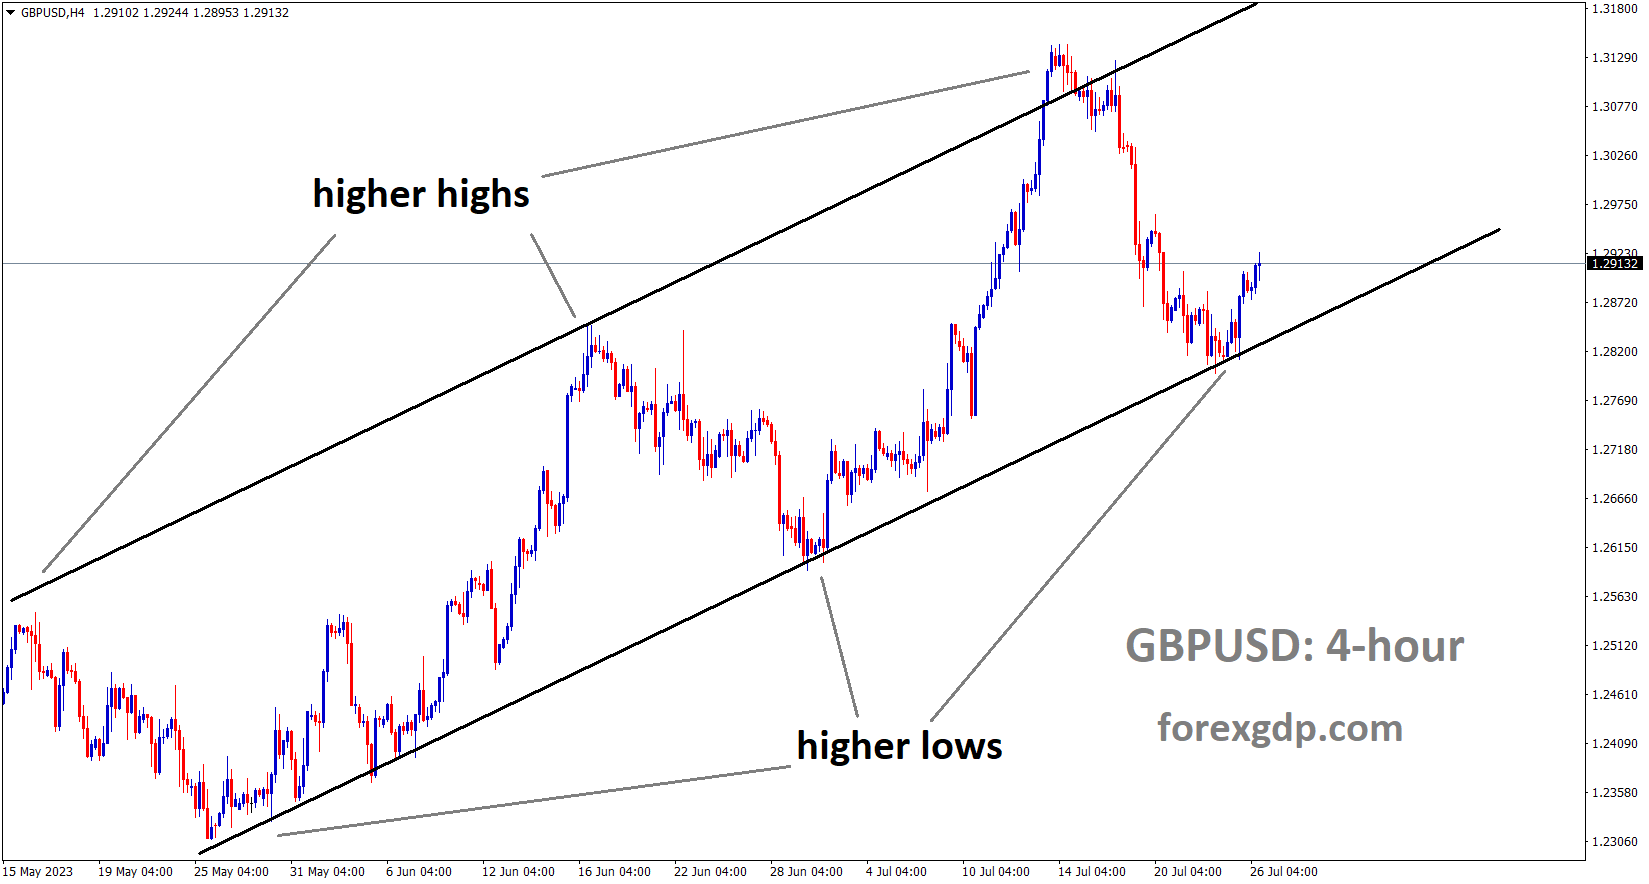 GBPUSD H4 TF analysis Market is moving in an Ascending channel and the market has rebounded from the higher low area of the channel 2